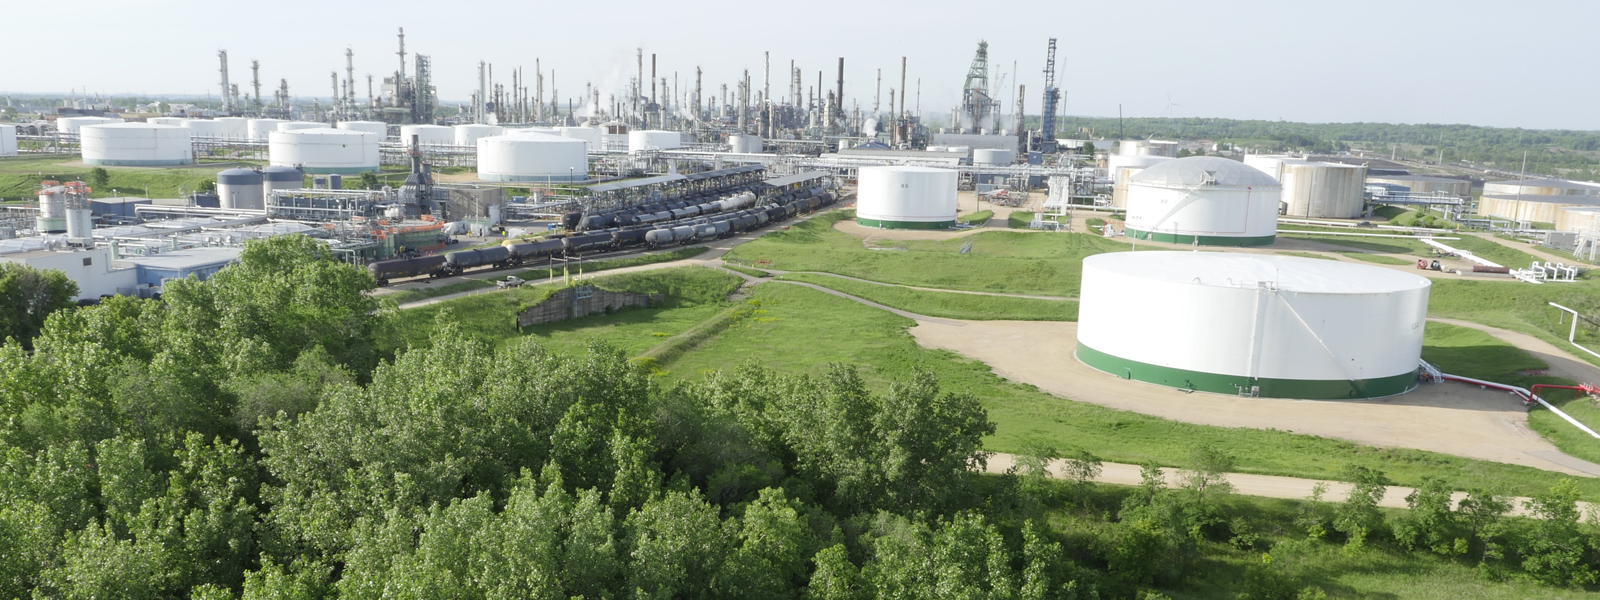 Flint Hills Resources to Implement More Stringent Energy Efficiency and Emission Standards as Part of Major Refinery Improvement Projects